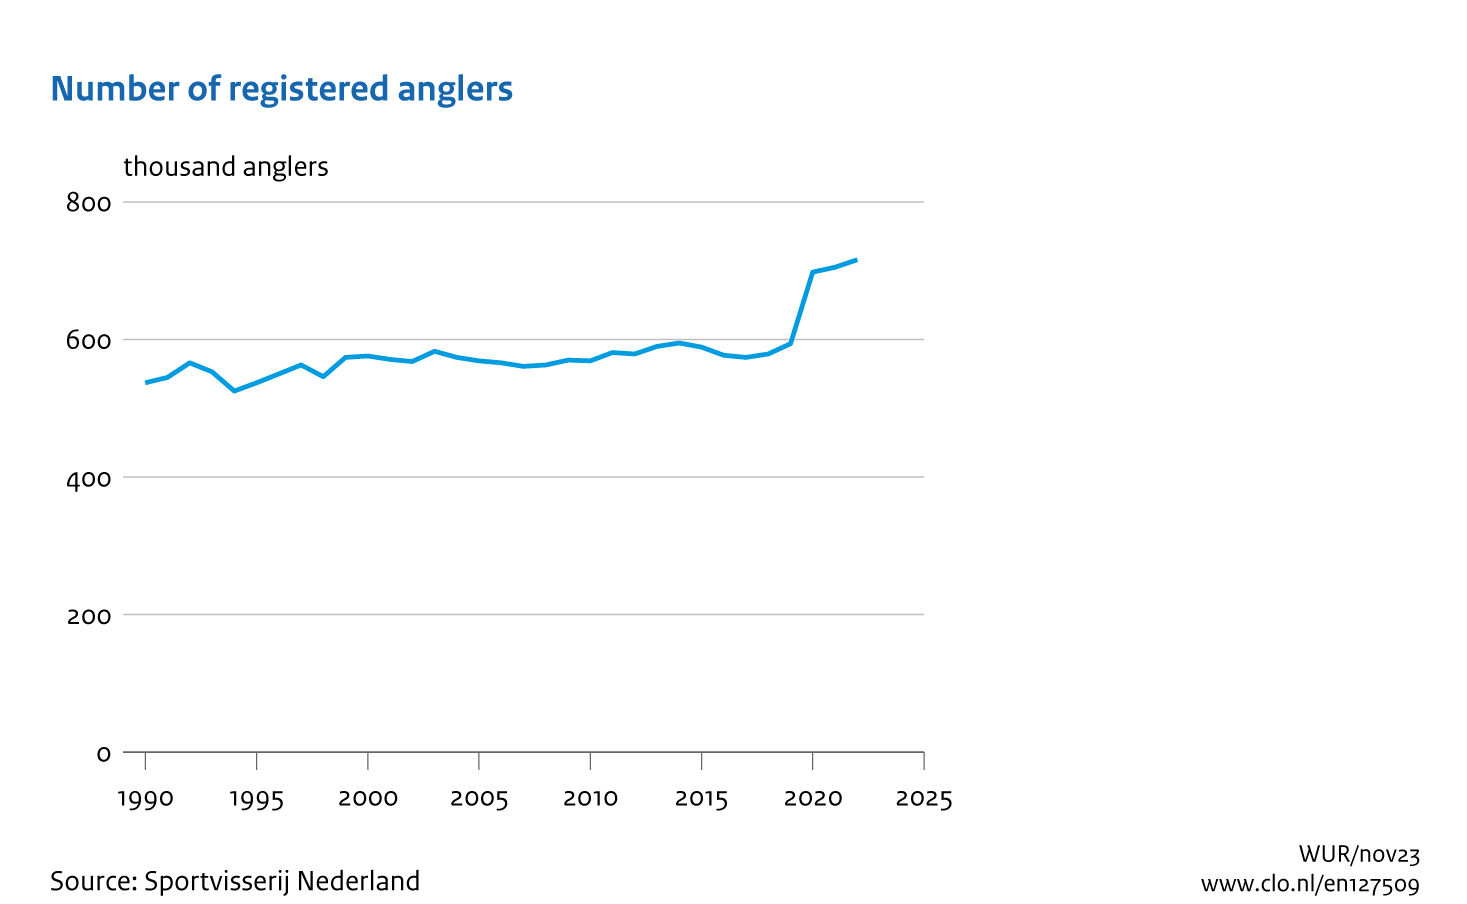 Image Number of registered anglers. The image is further explained in the text.